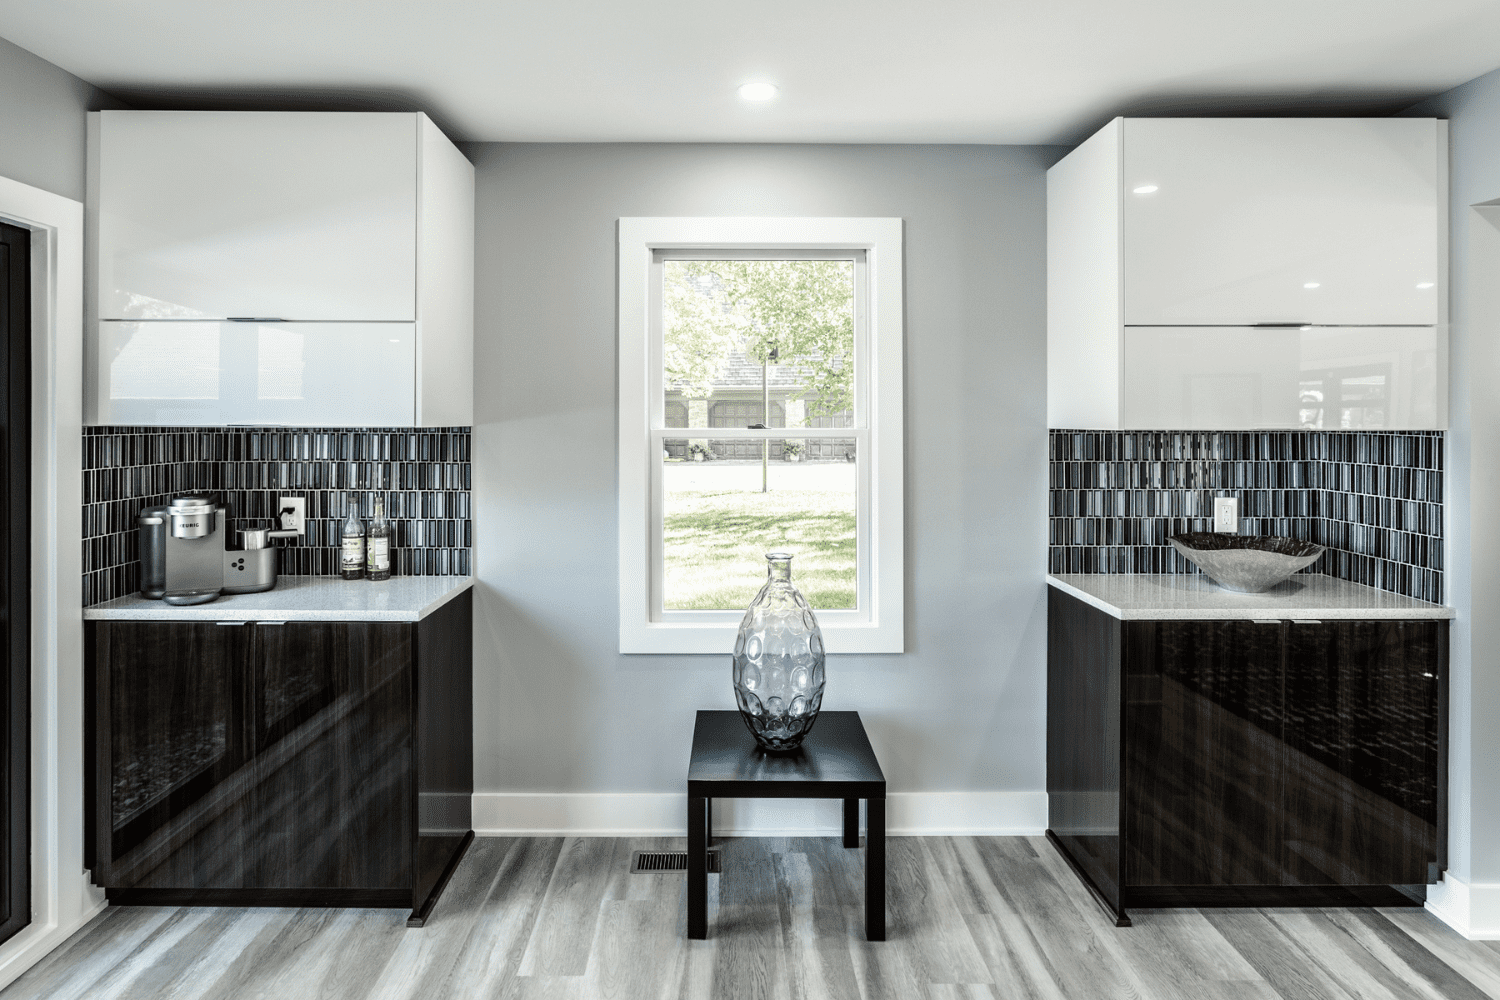 Nicholas Design Build | A bathroom with black and white cabinets and a window.